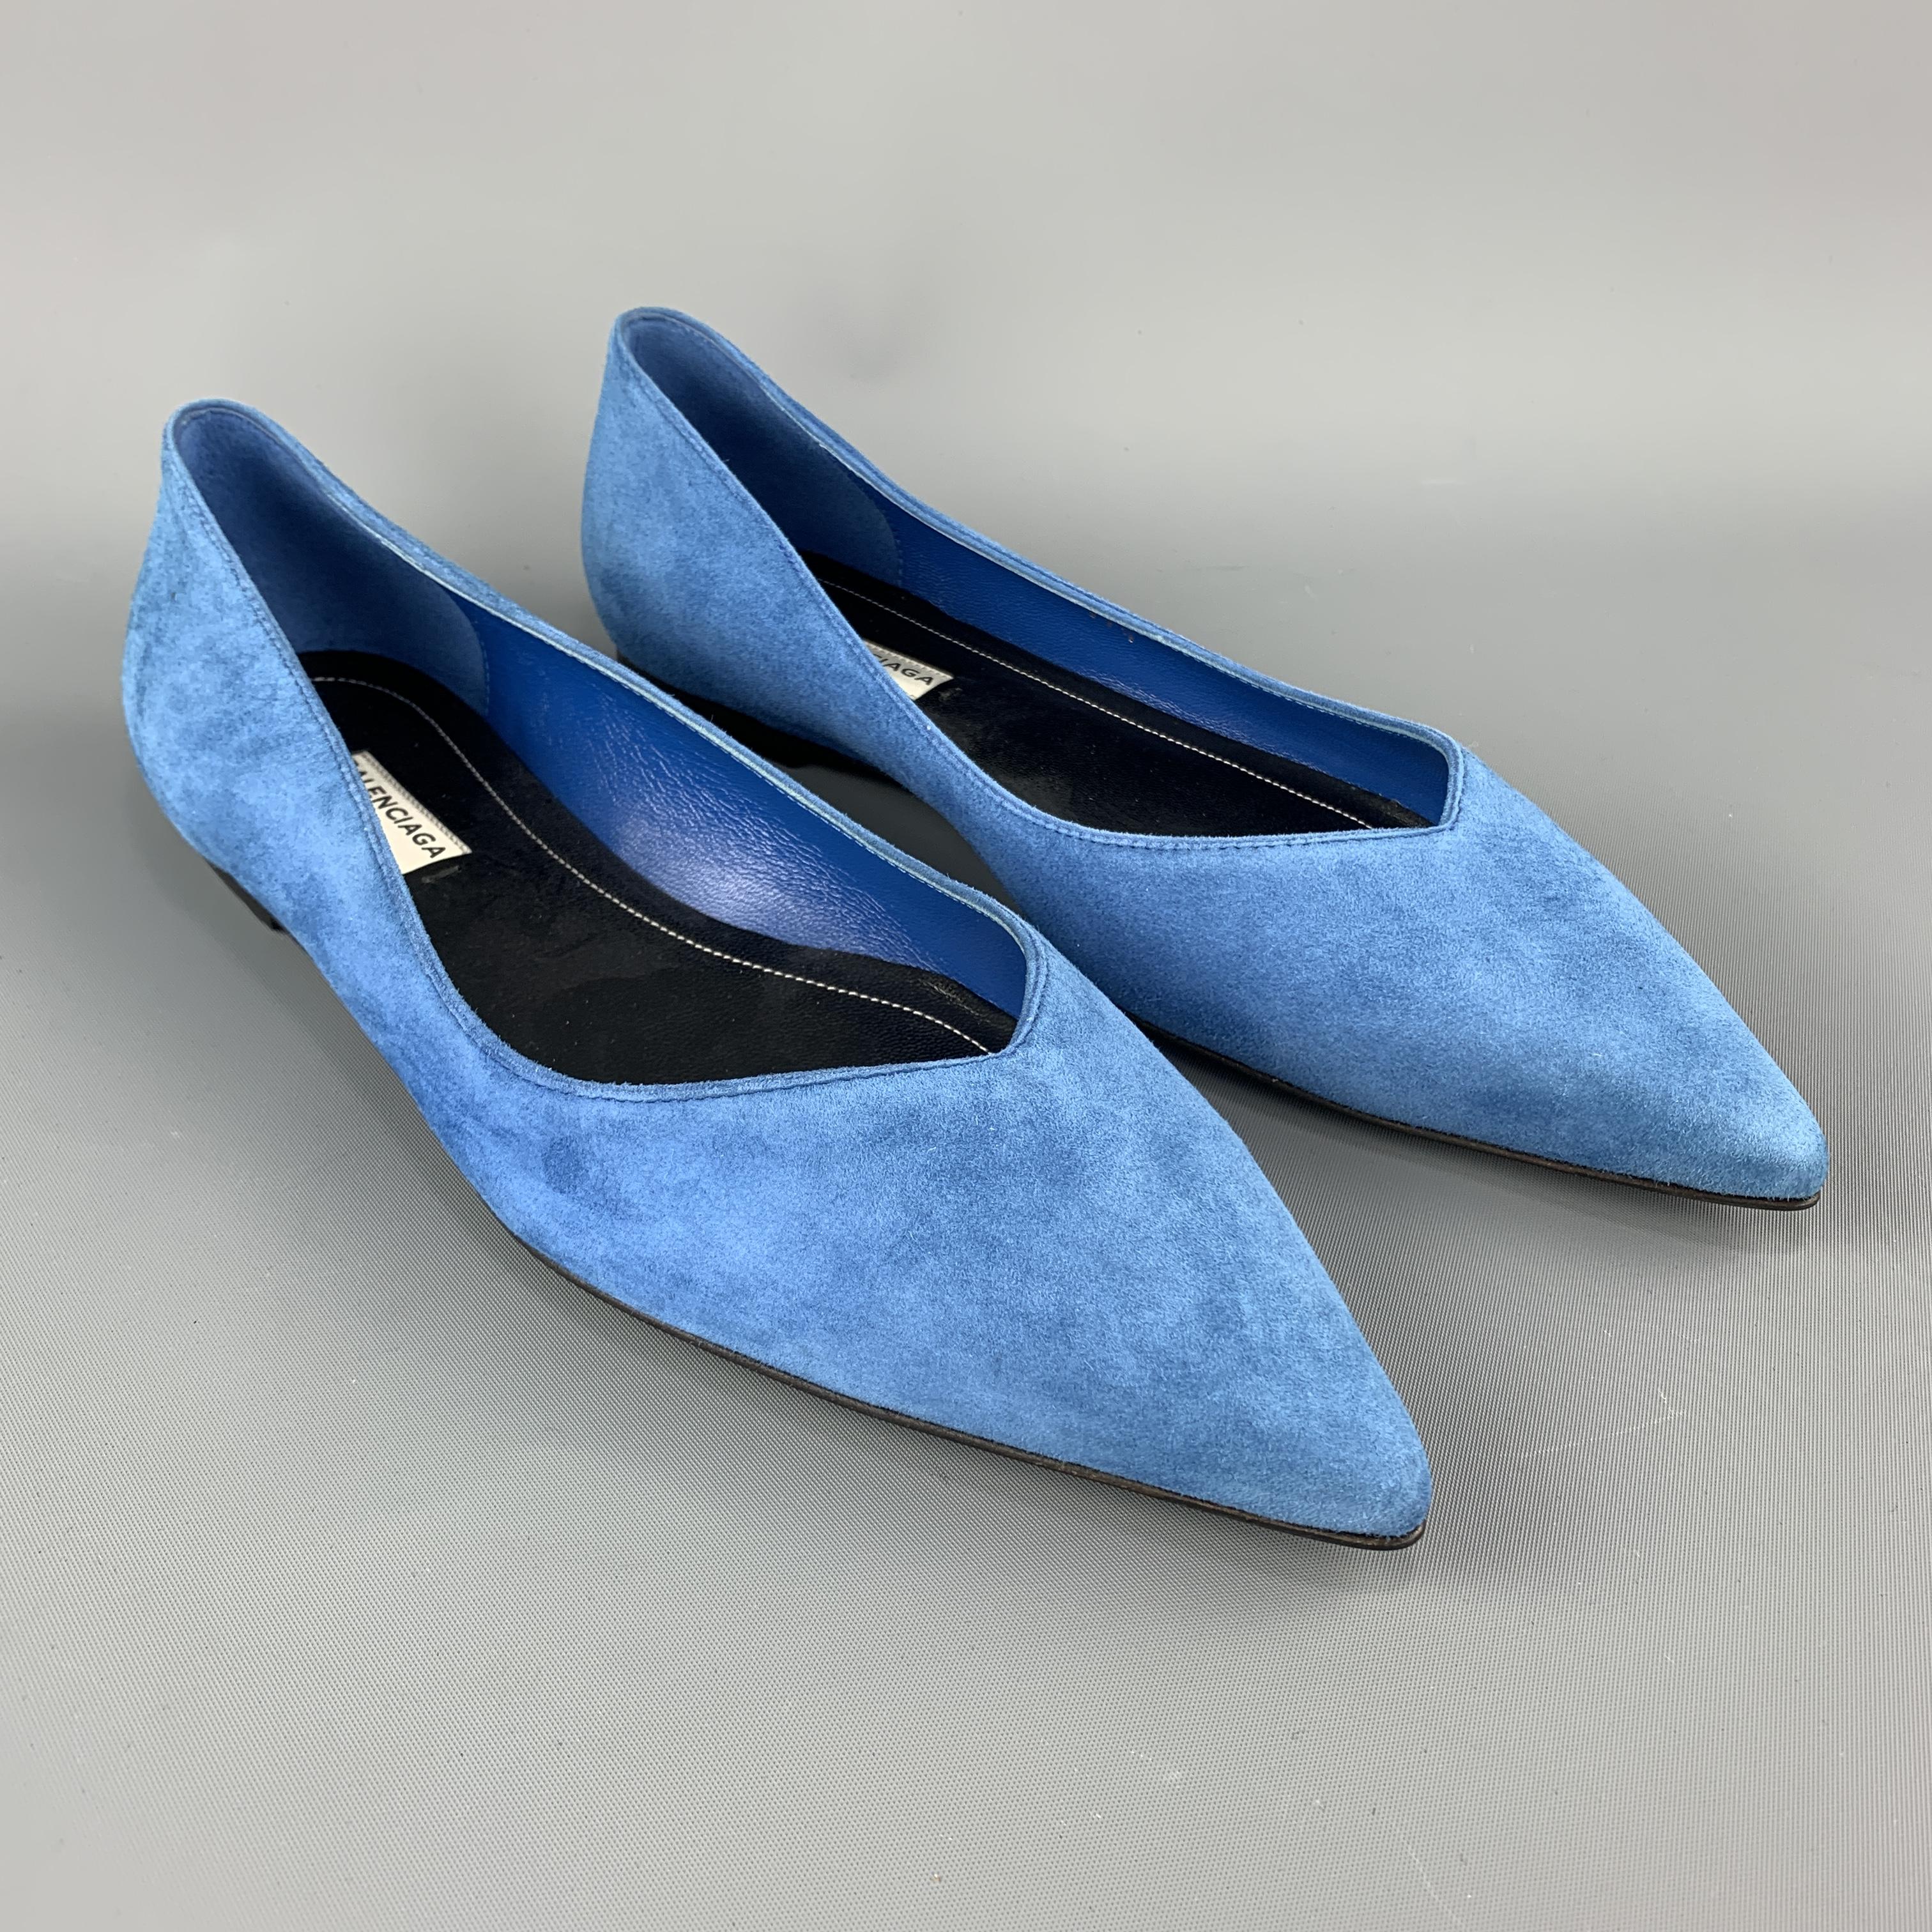 BALENCIAGA flats come in blue suede with a pointed toe. Made in Italy.

Brand New.
Marked: IT 37.5

Outsole: 10.5 x 3.25 in.